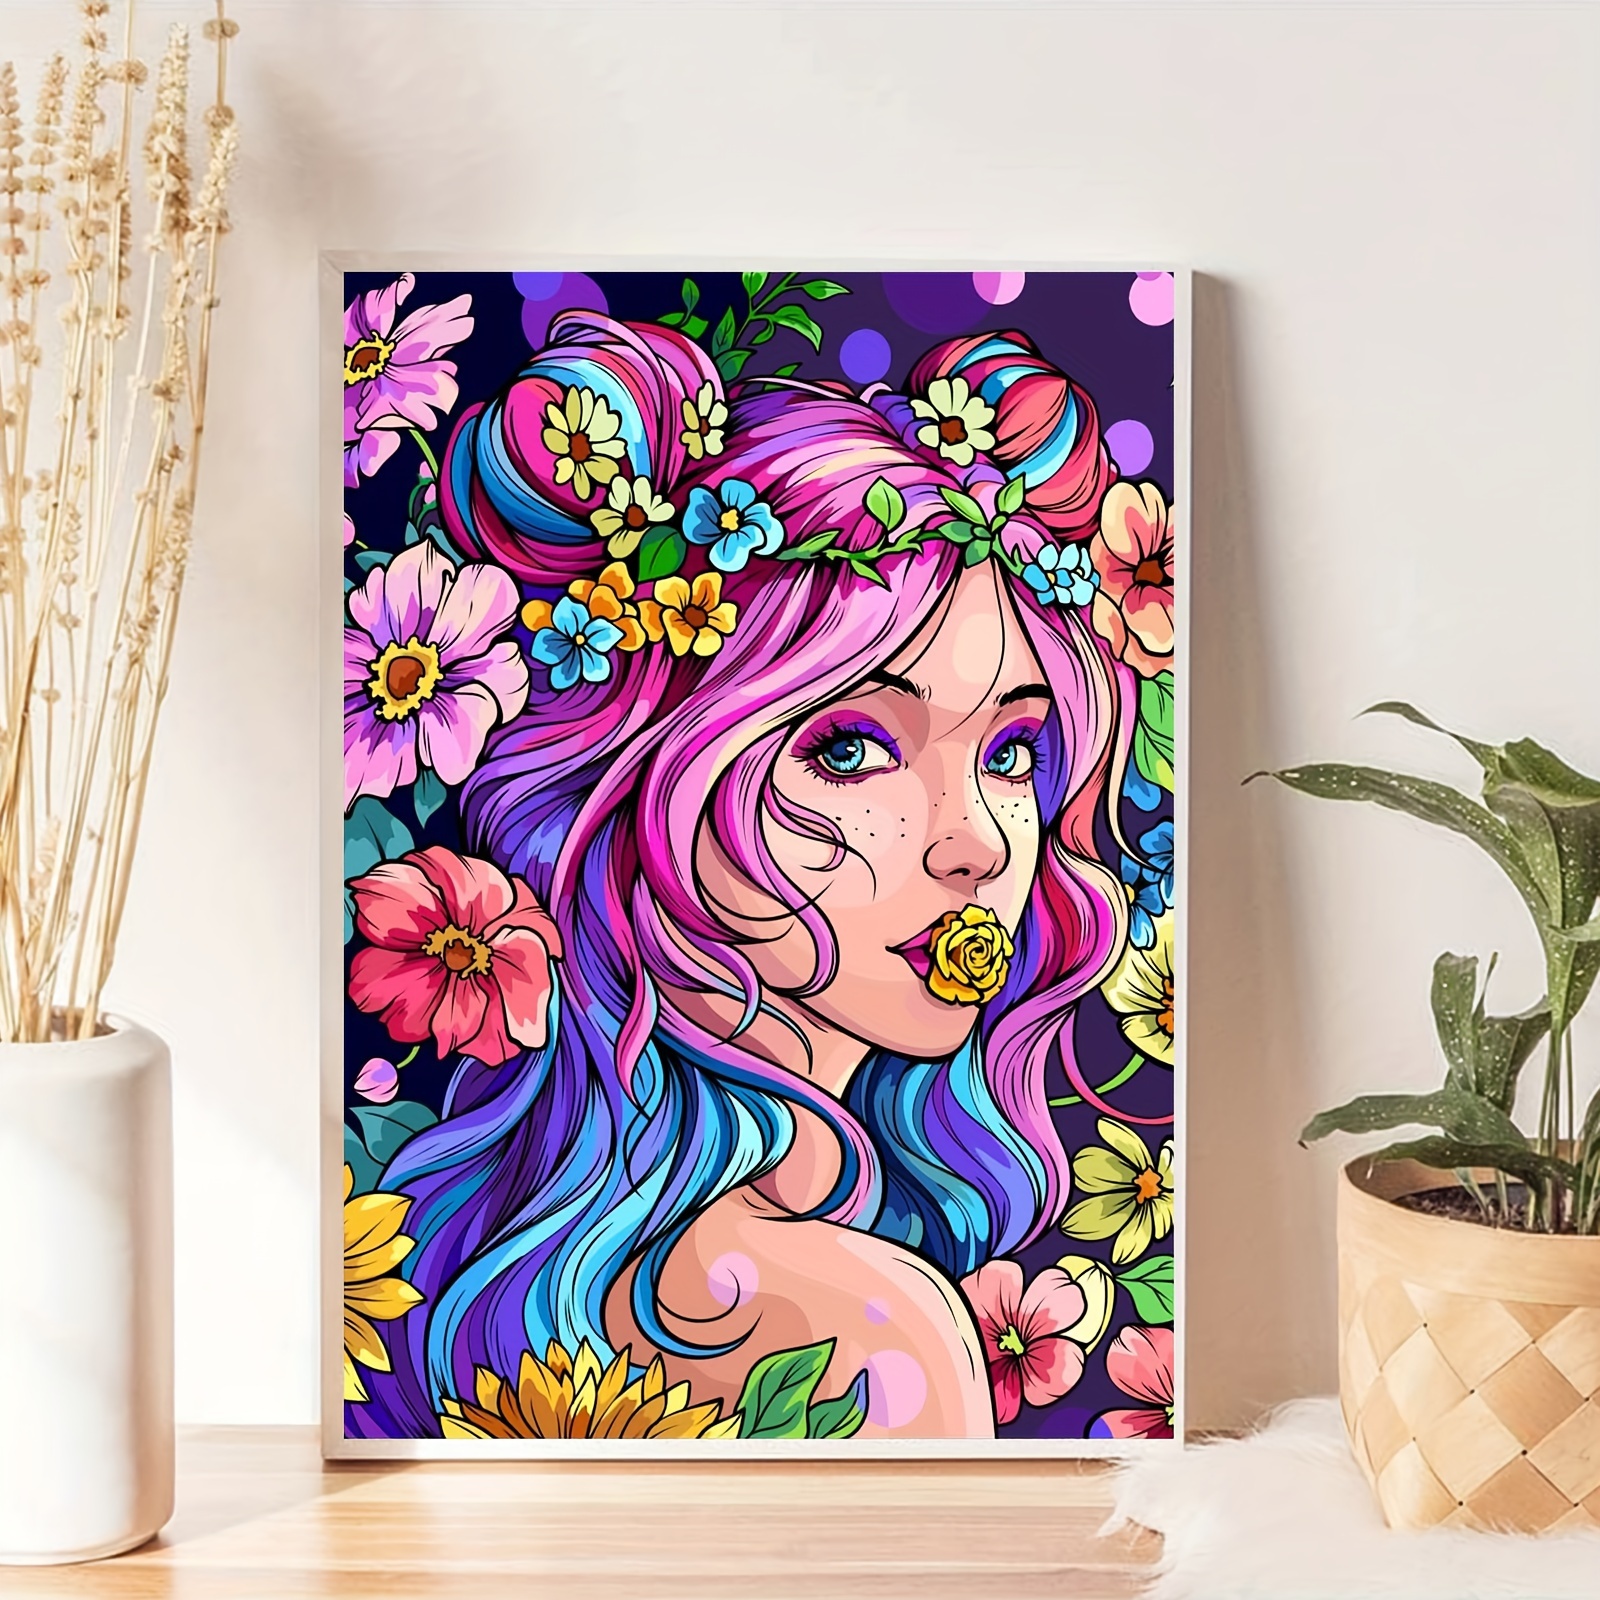 Eye With Rose Tattoo DIY 5D Diamond Painting Kits for Adults Full Drill  Round or Square Diamond Painting Home Wall Art Décor 12x16 Inches 